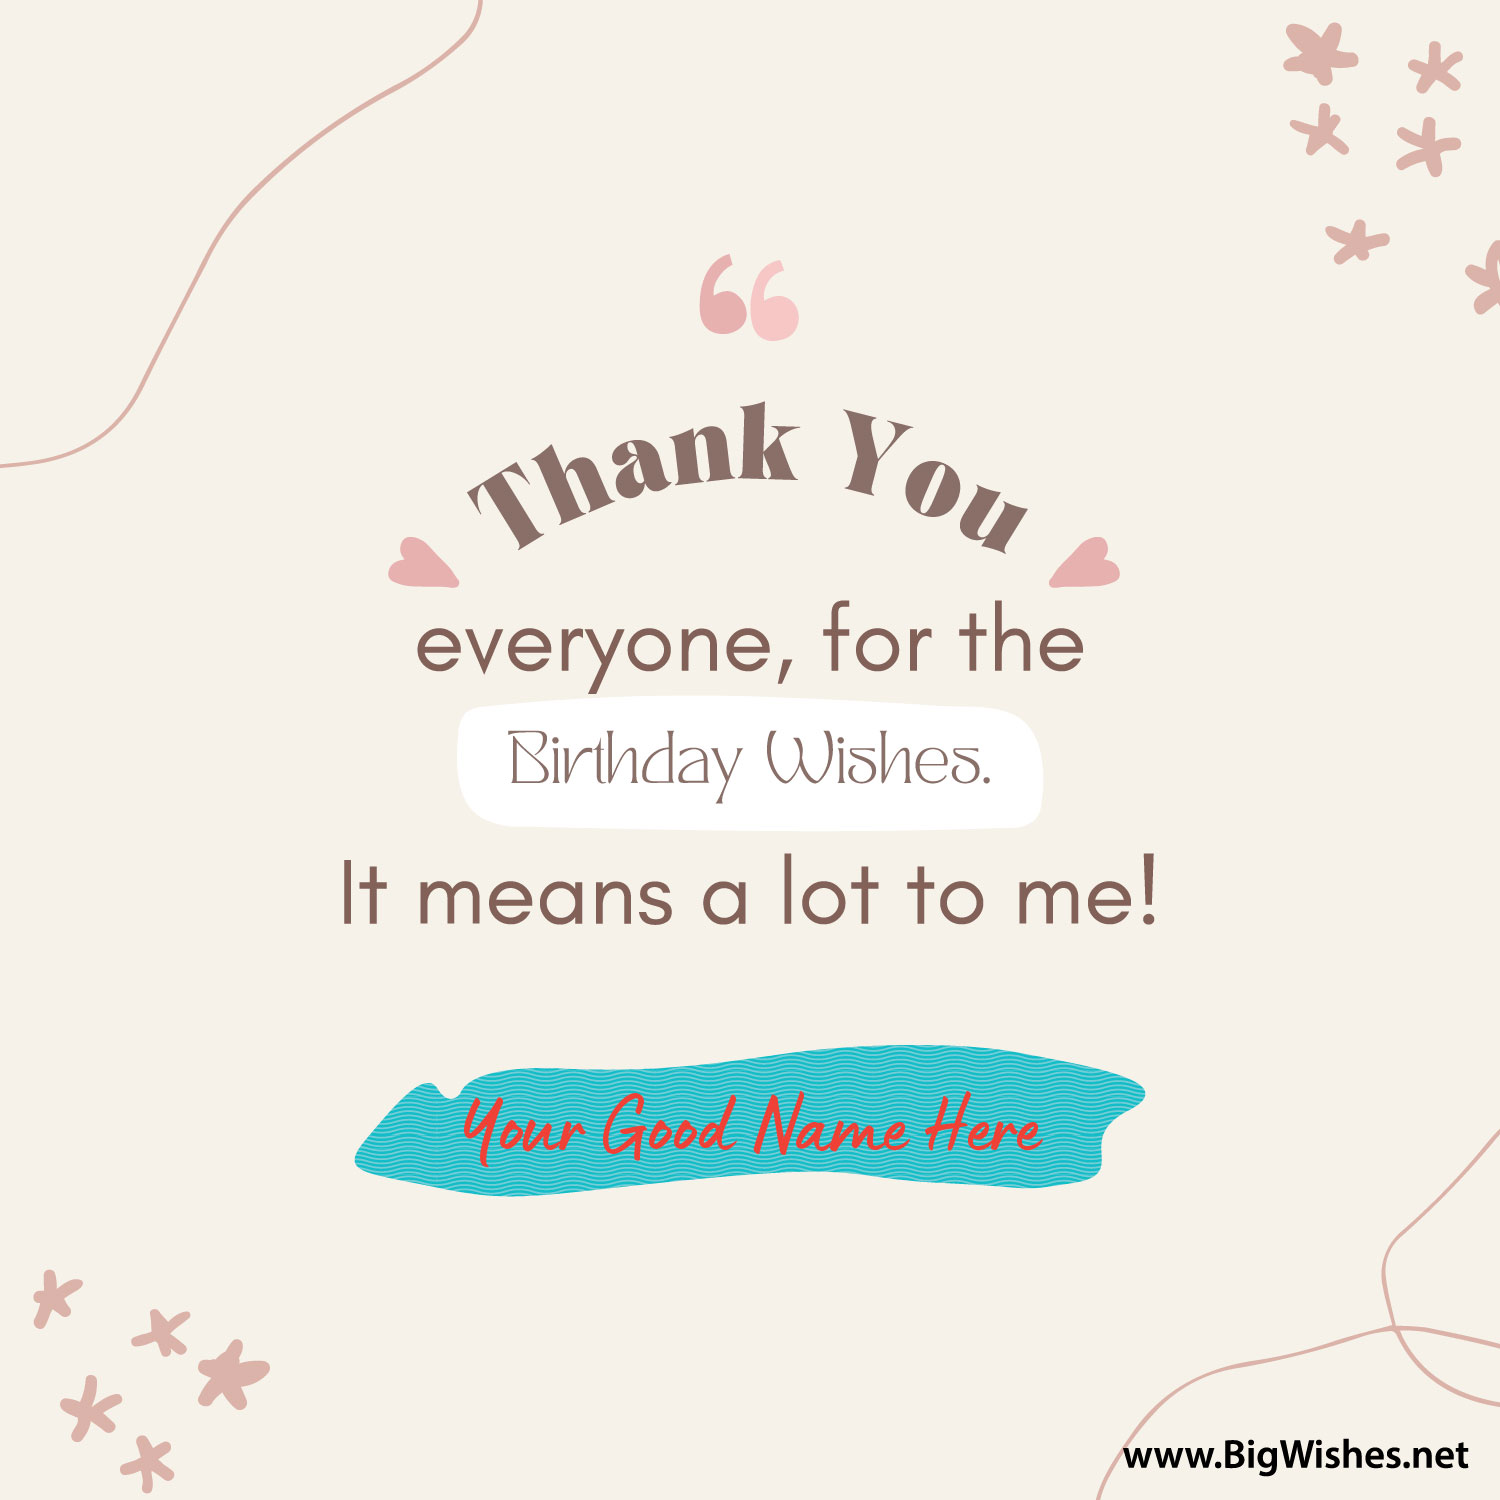 Thank You Note Or Message for Birthday Wishes